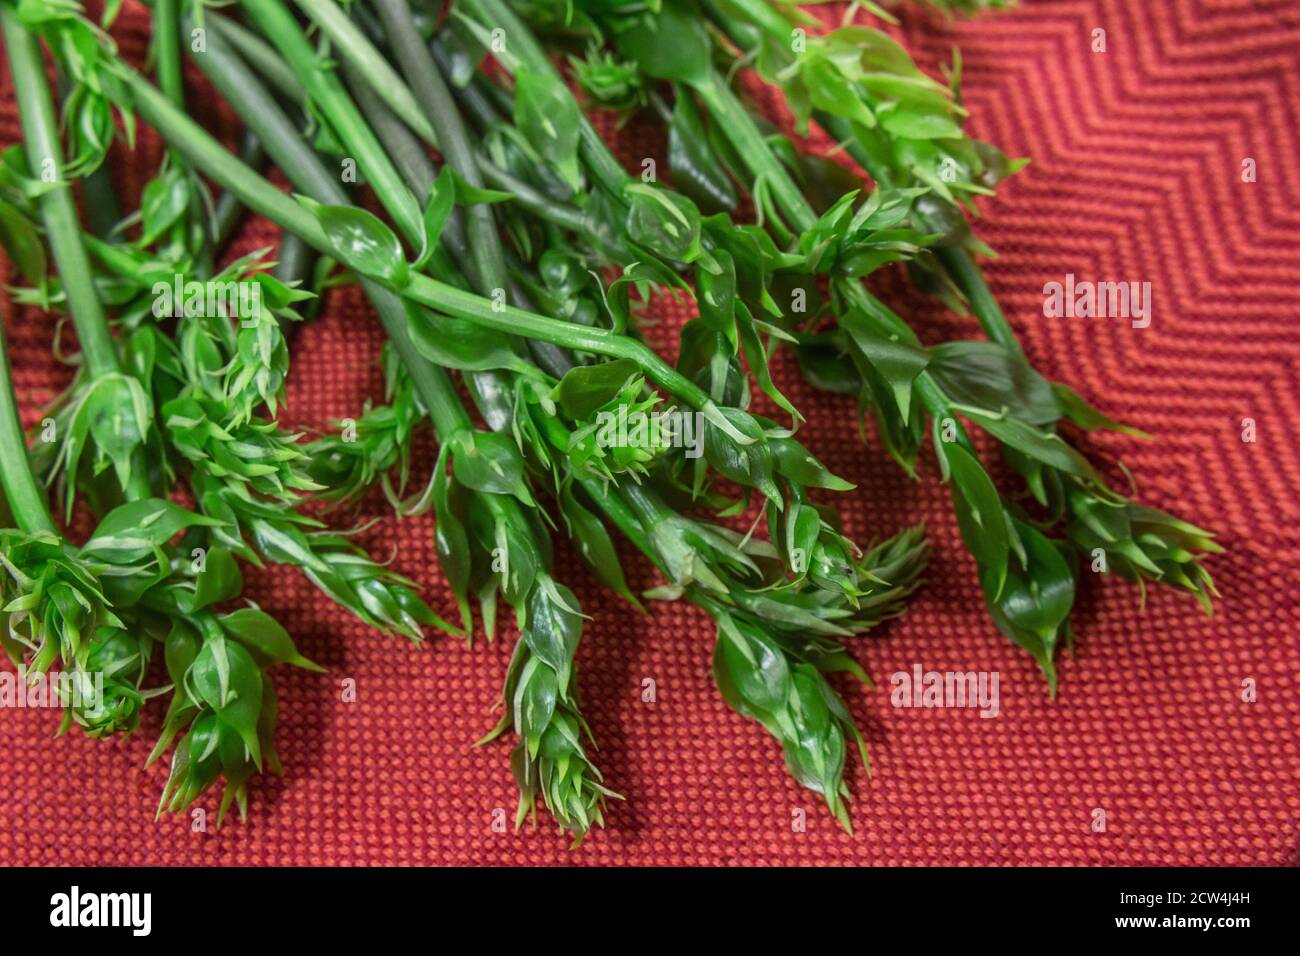 Shoots of holly, similar to asparagus, called in Sicily 'asparaci i trono', on a red tablecloth. Example of complementary colors Stock Photo